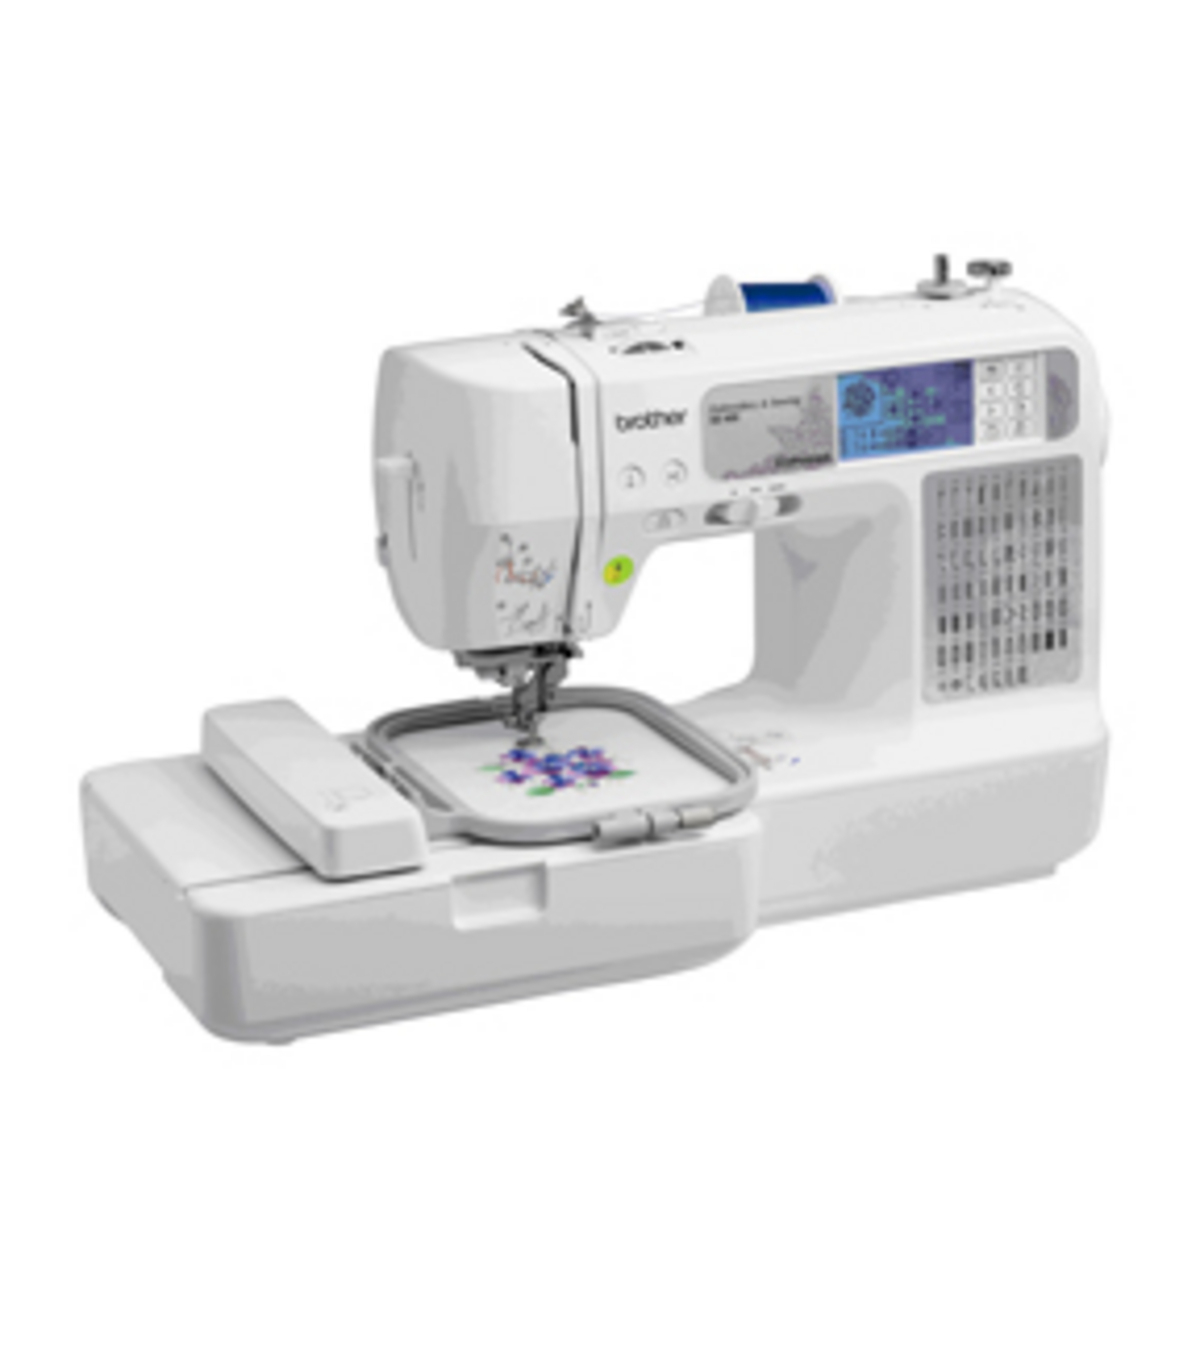 Brother Sewing Machine Embroidery Patterns Brother Se400 Computerized Sewing Embroidery Machine